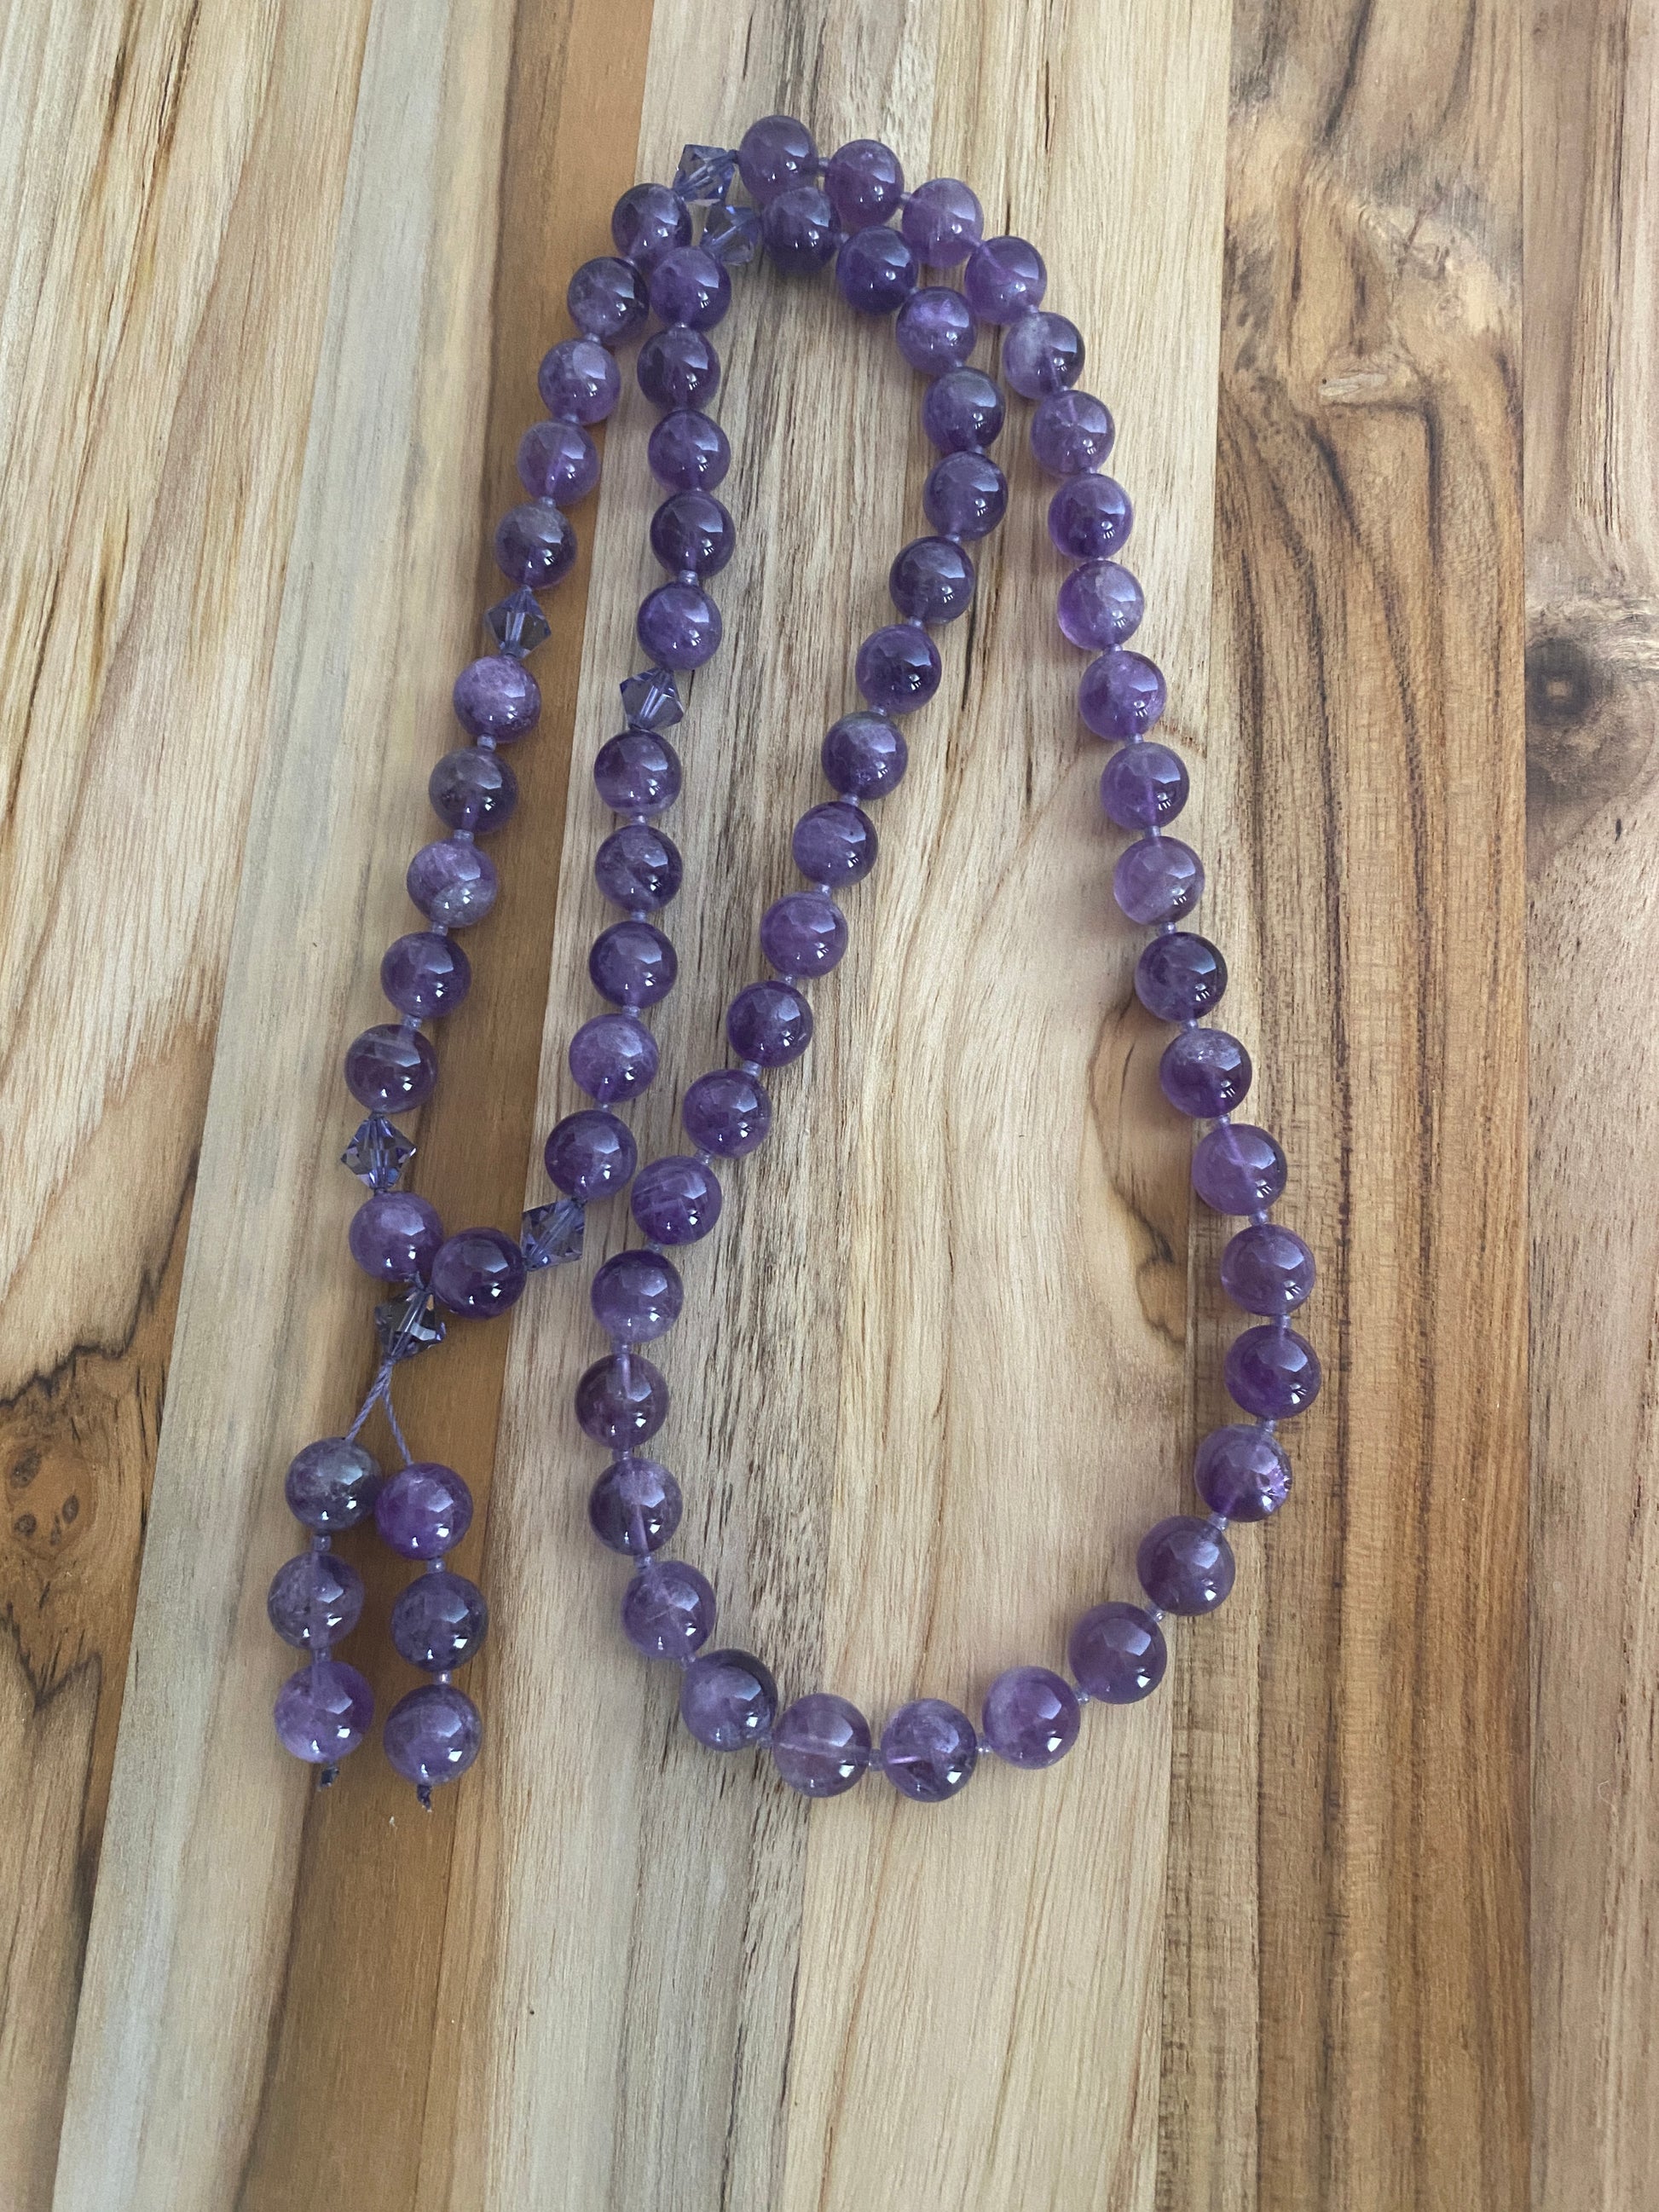 30" Long Amethyst and Crystal Beaded Necklace - My Urban Gems